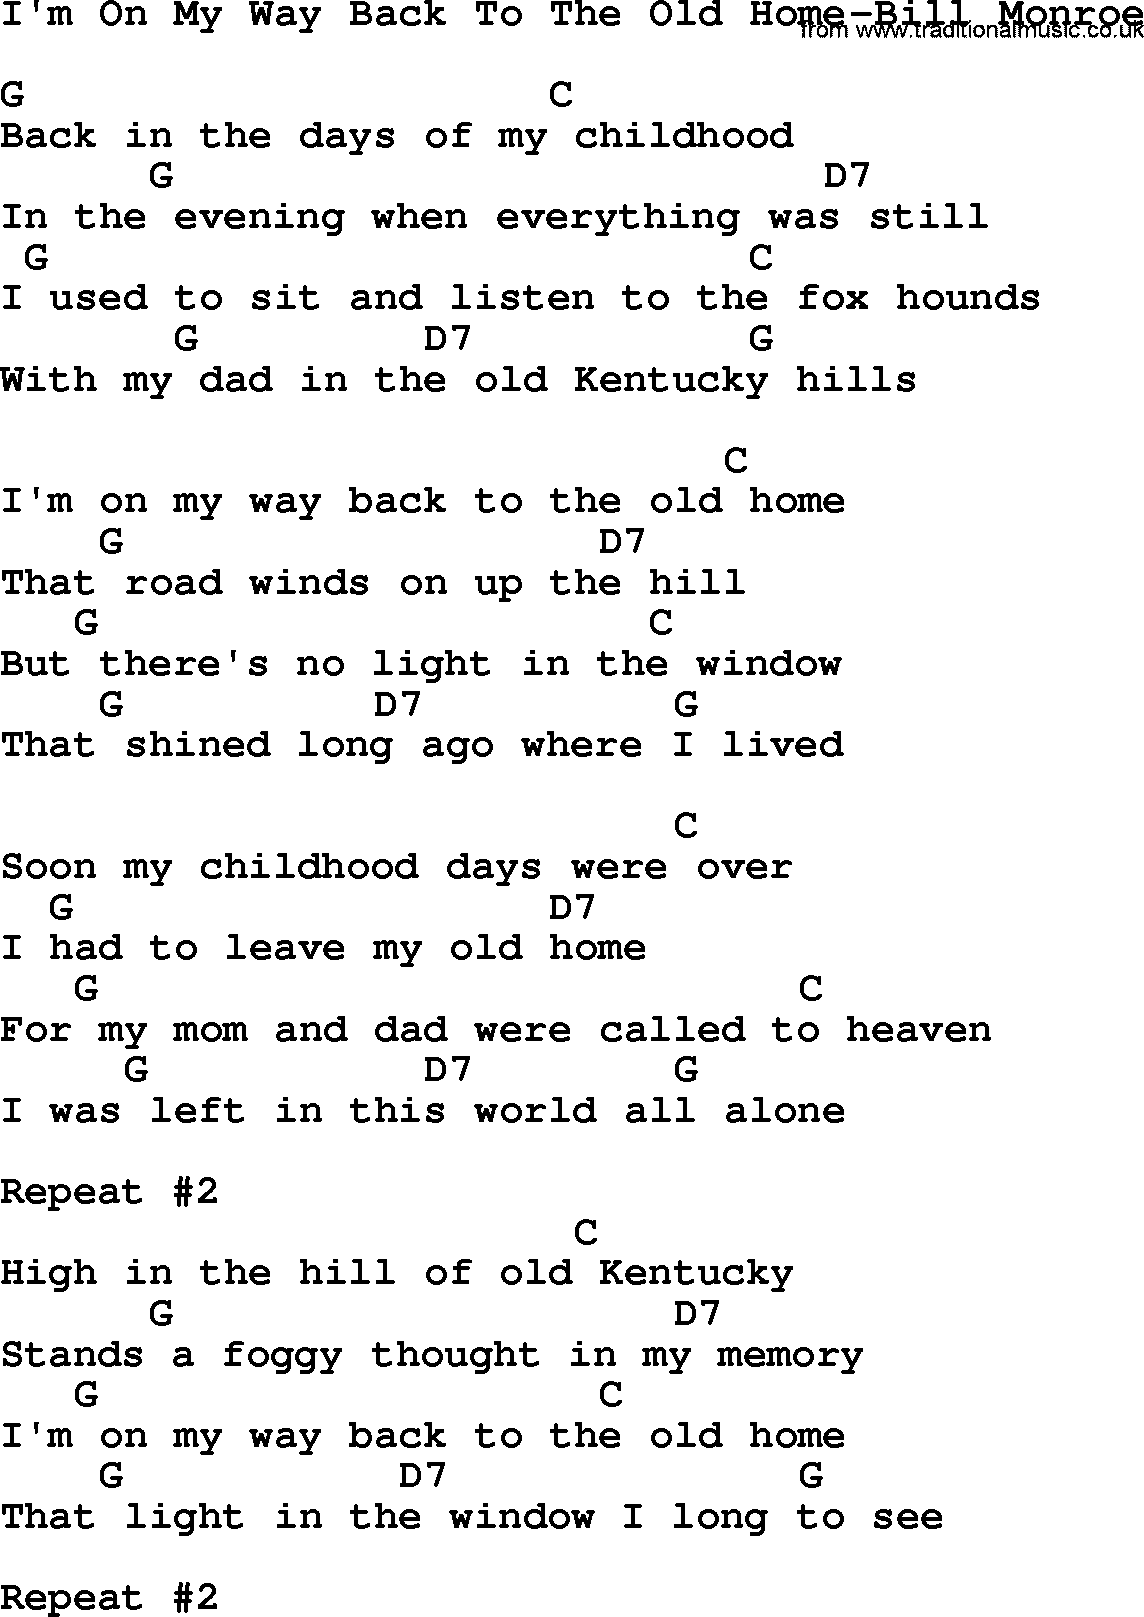 Country music song: I'm On My Way Back To The Old Home-Bill Monroe lyrics and chords